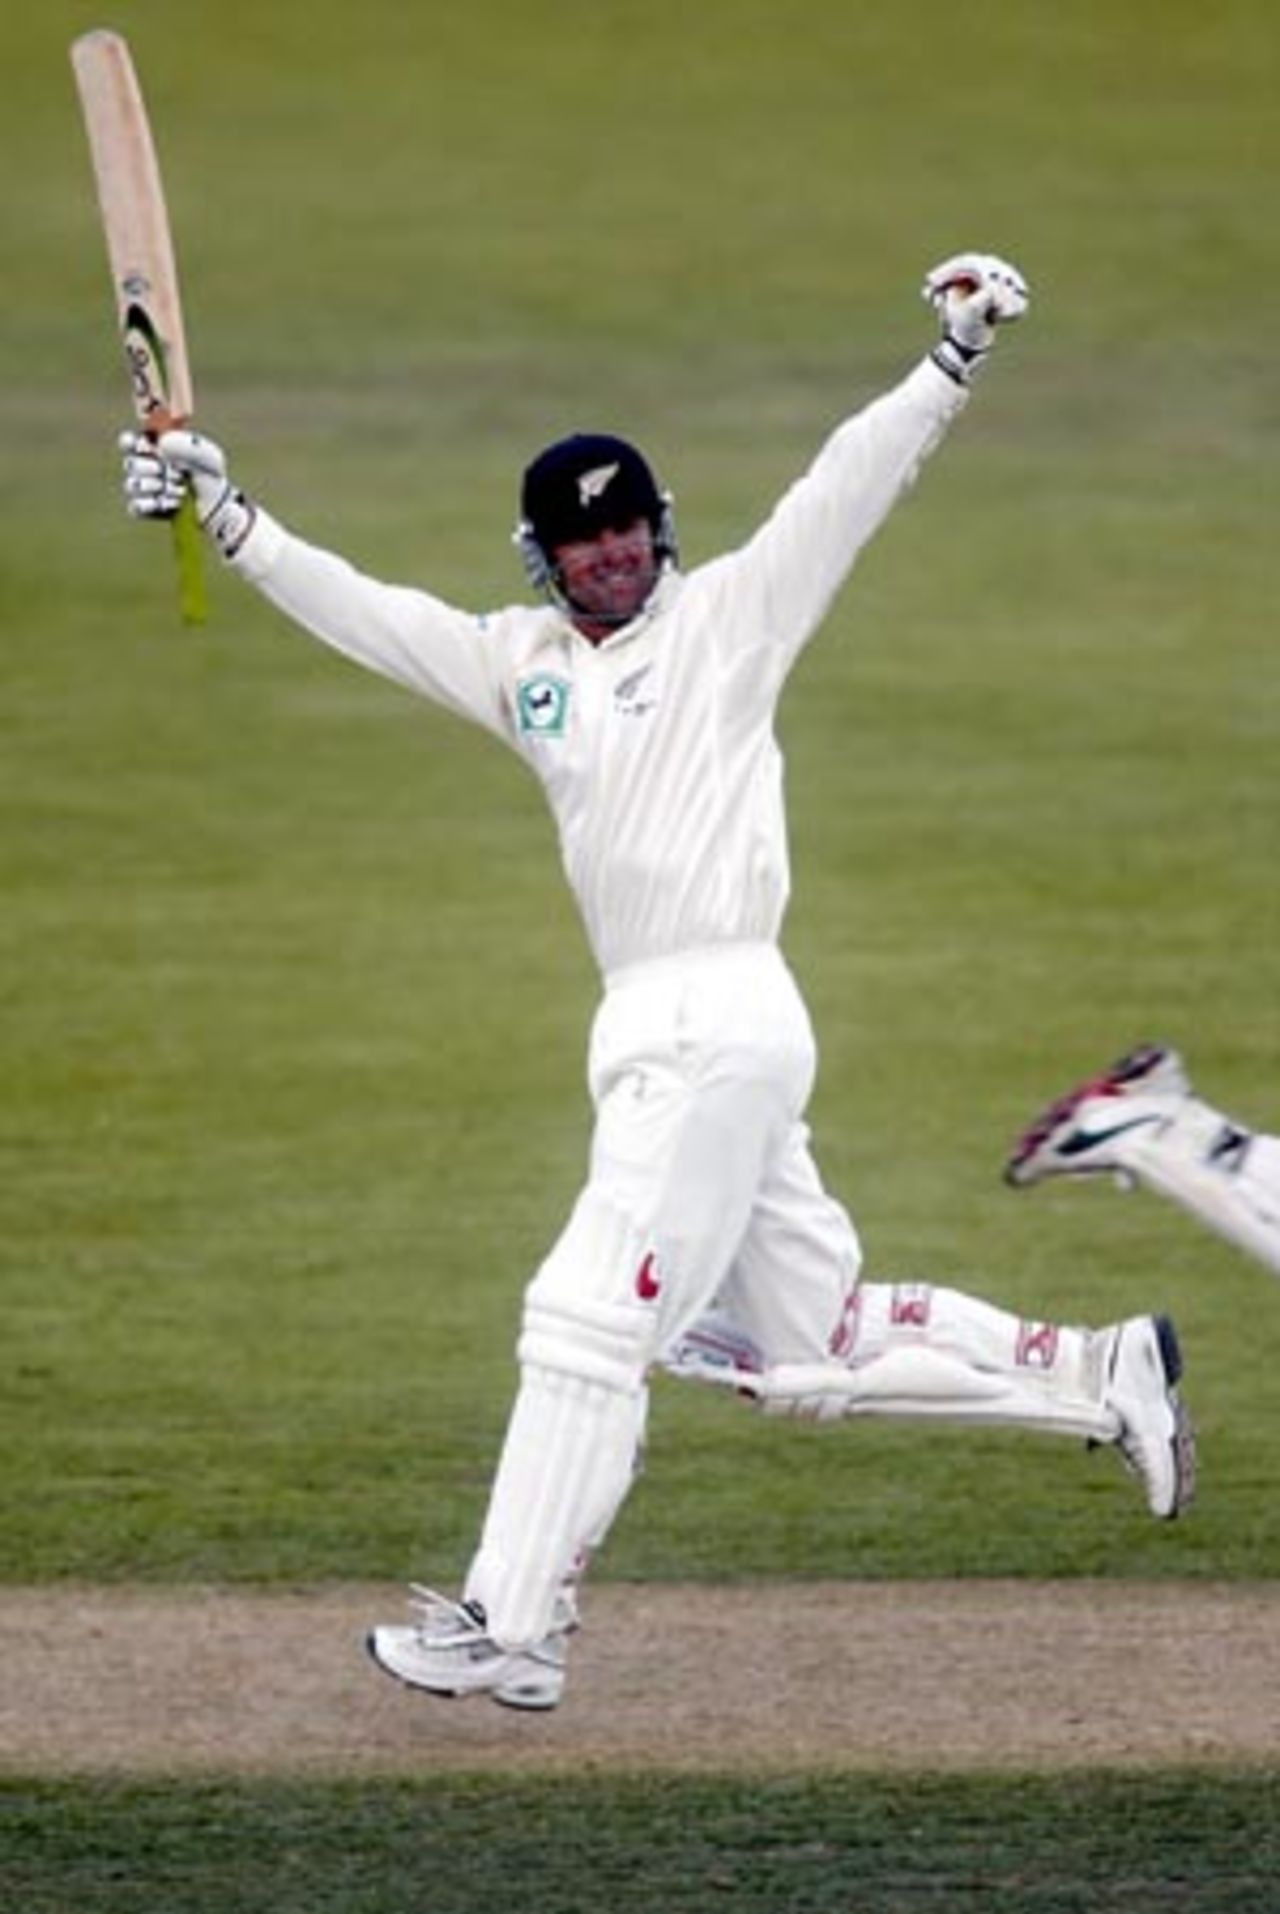 New Zealand batsman Nathan Astle raises his arms to celebrate reaching his double century. Astle went on to score 222 in his second innings. 1st Test: New Zealand v England at Jade Stadium, Christchurch, 13-17 March 2002 (16 March 2002).